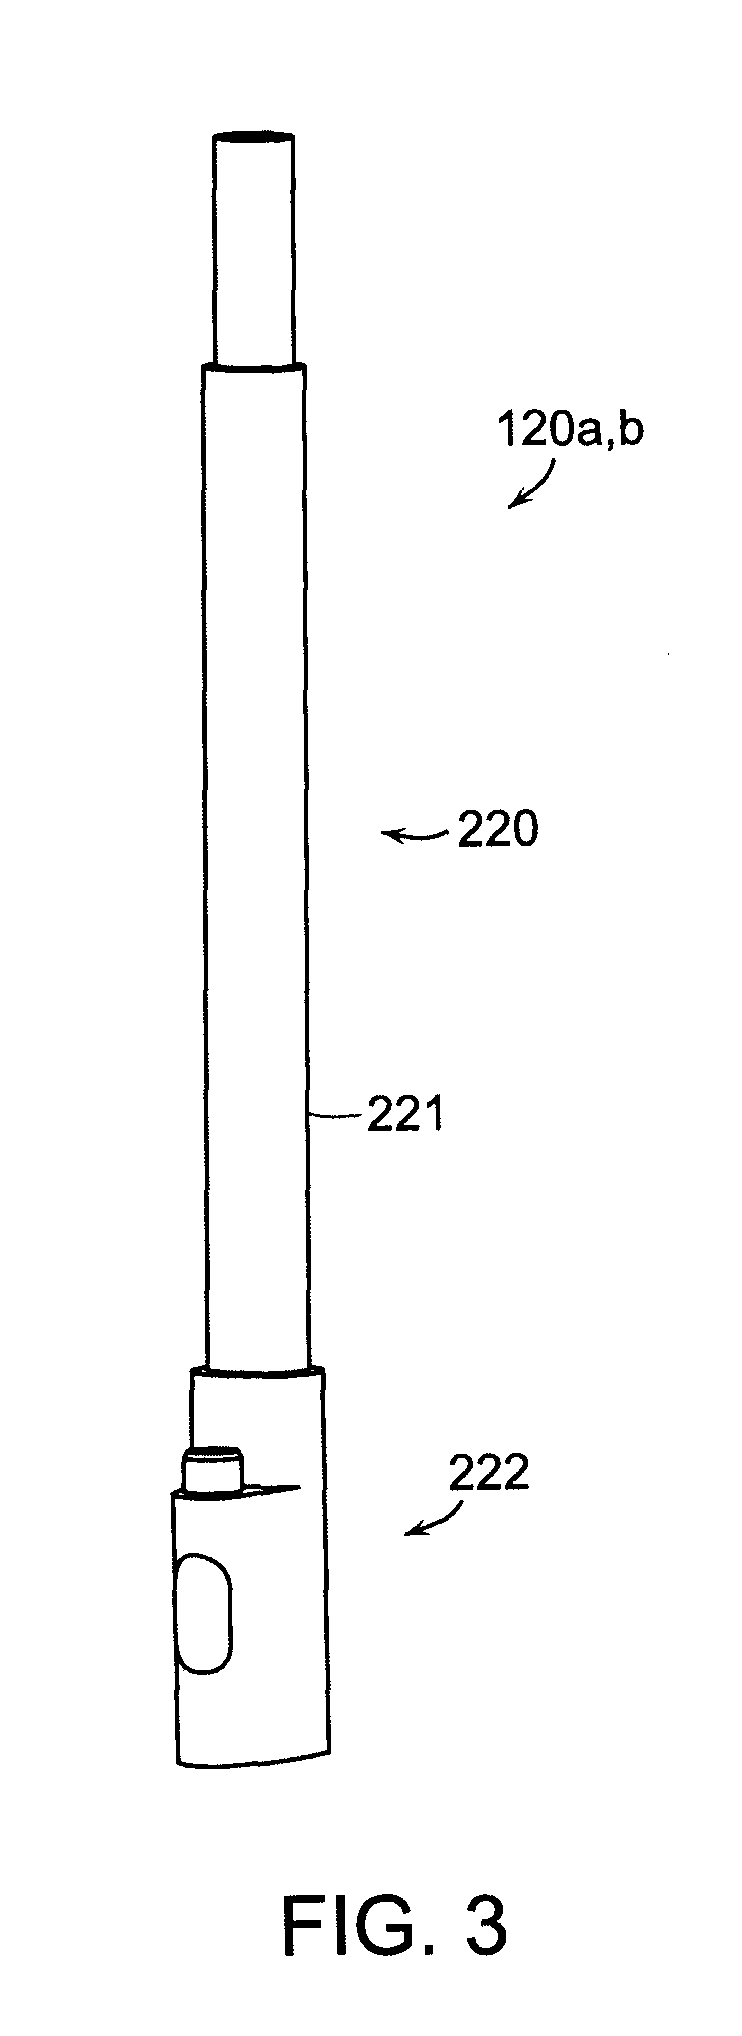 Vertebral body reduction instrument and methods related thereto